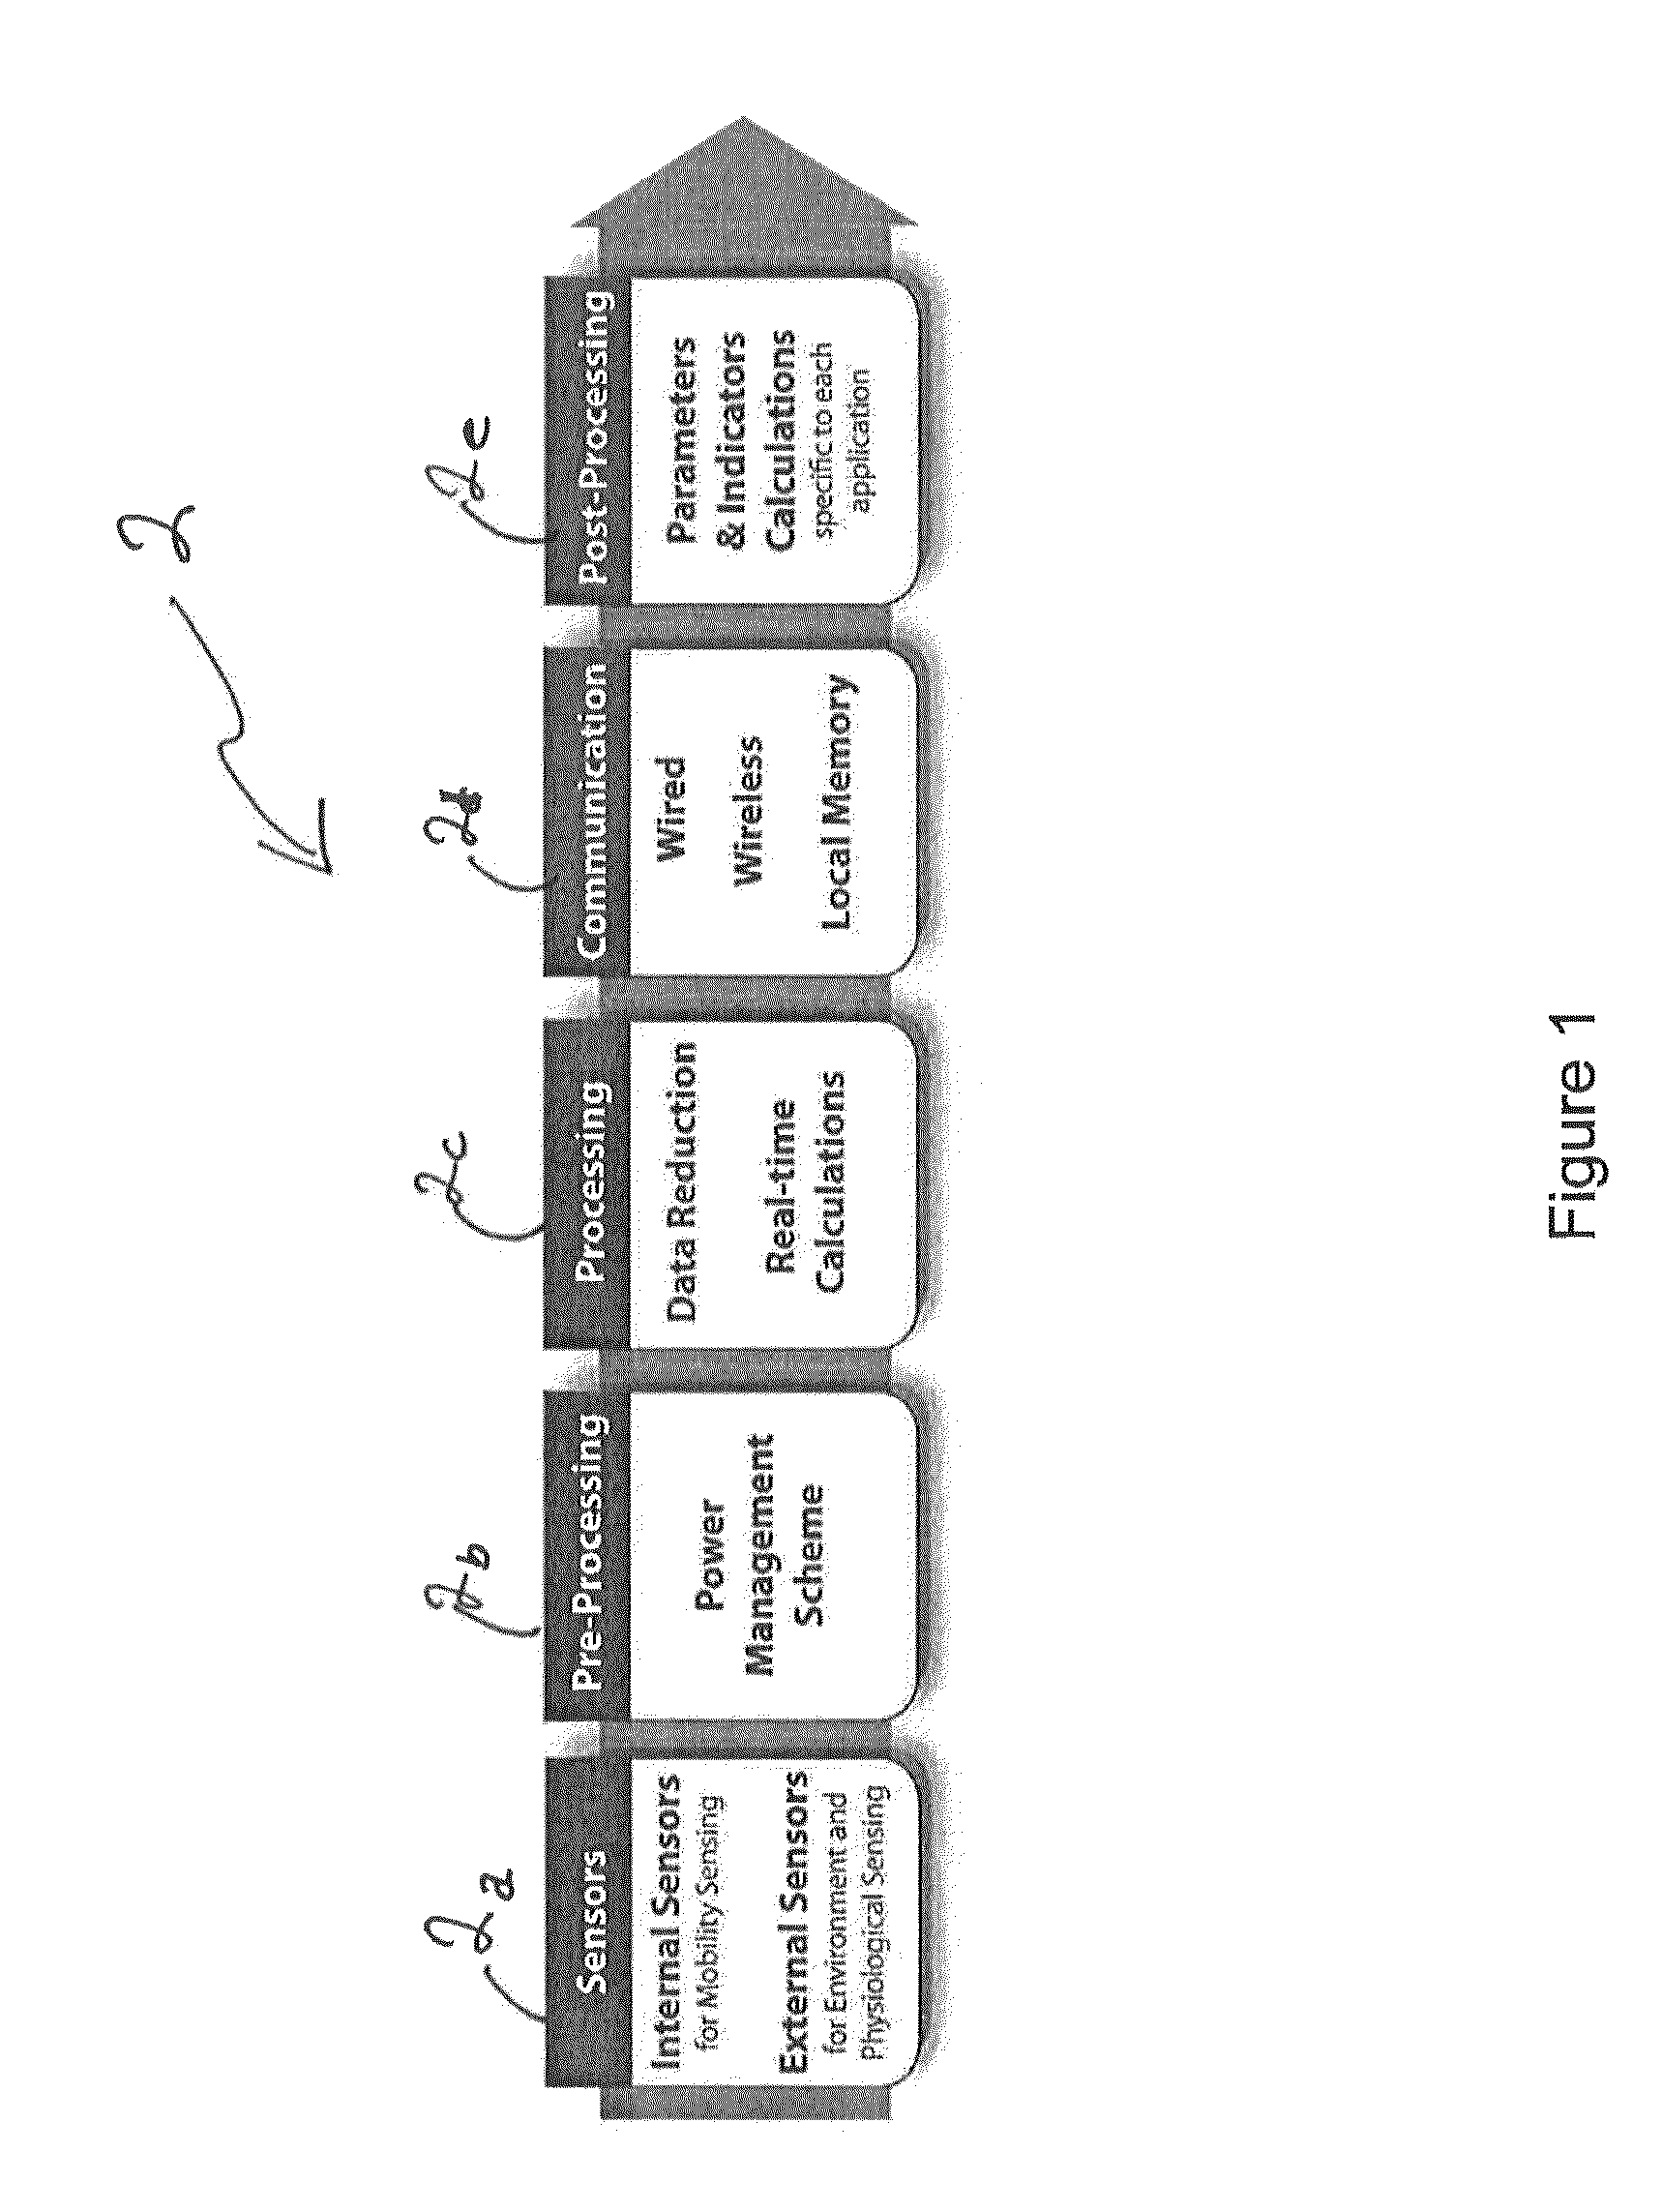 Universal actigraphic device and method of use therefor